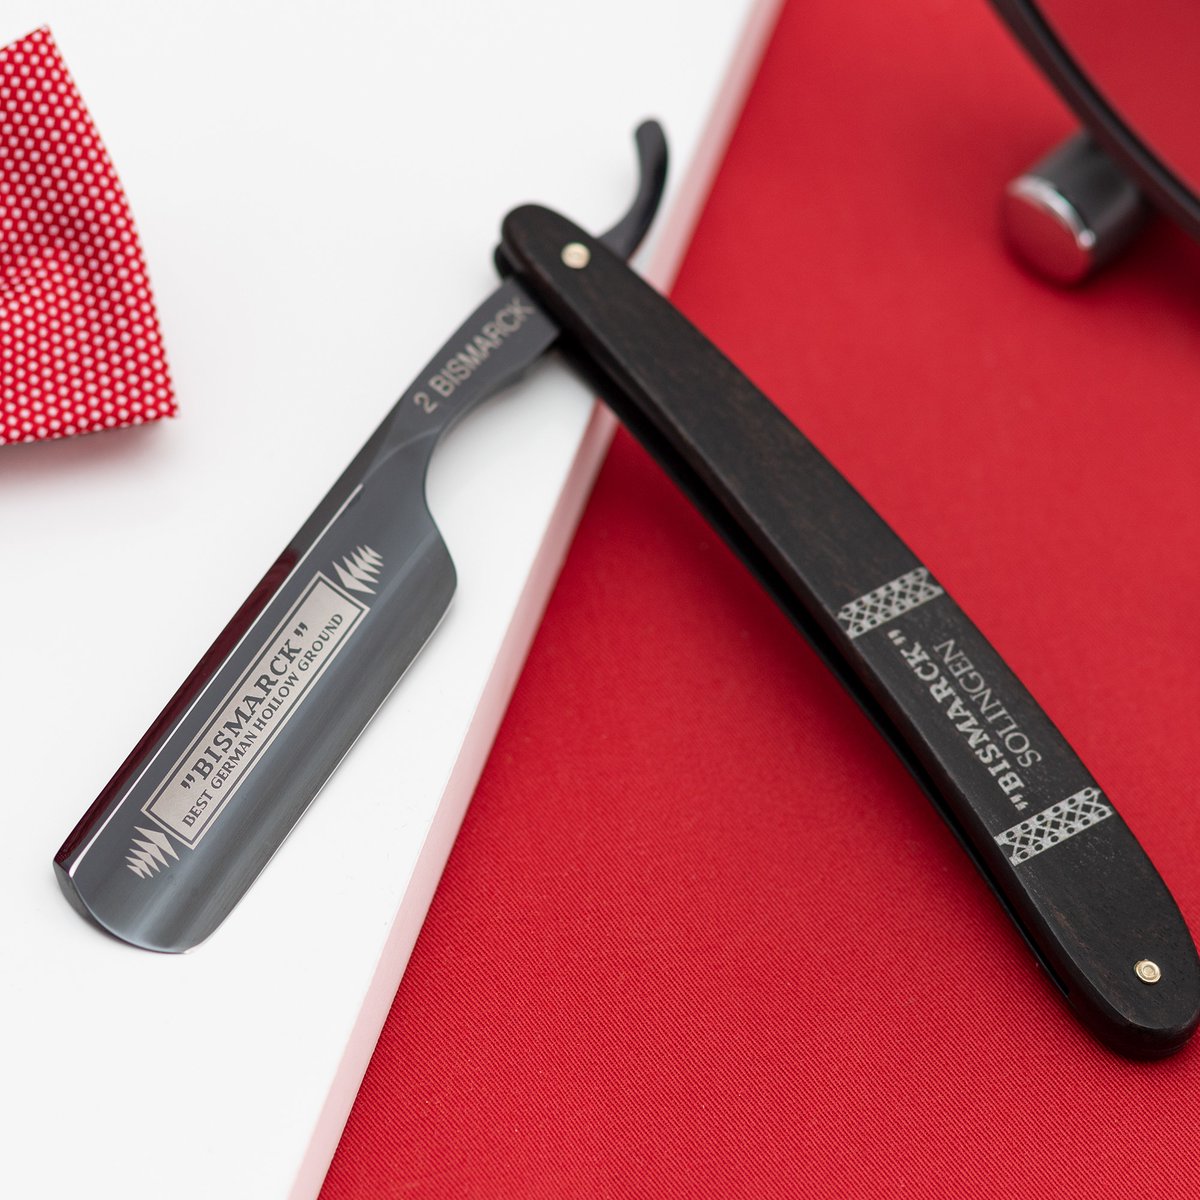 Love at first shave. View the 'Bismarck' straight razor by Dovo here: ow.ly/8HiI50MCjeC

#sotd #straightrazor #wetshaving #DOVOSolingen #madeinGermany #mensgrooming #Fendrihan